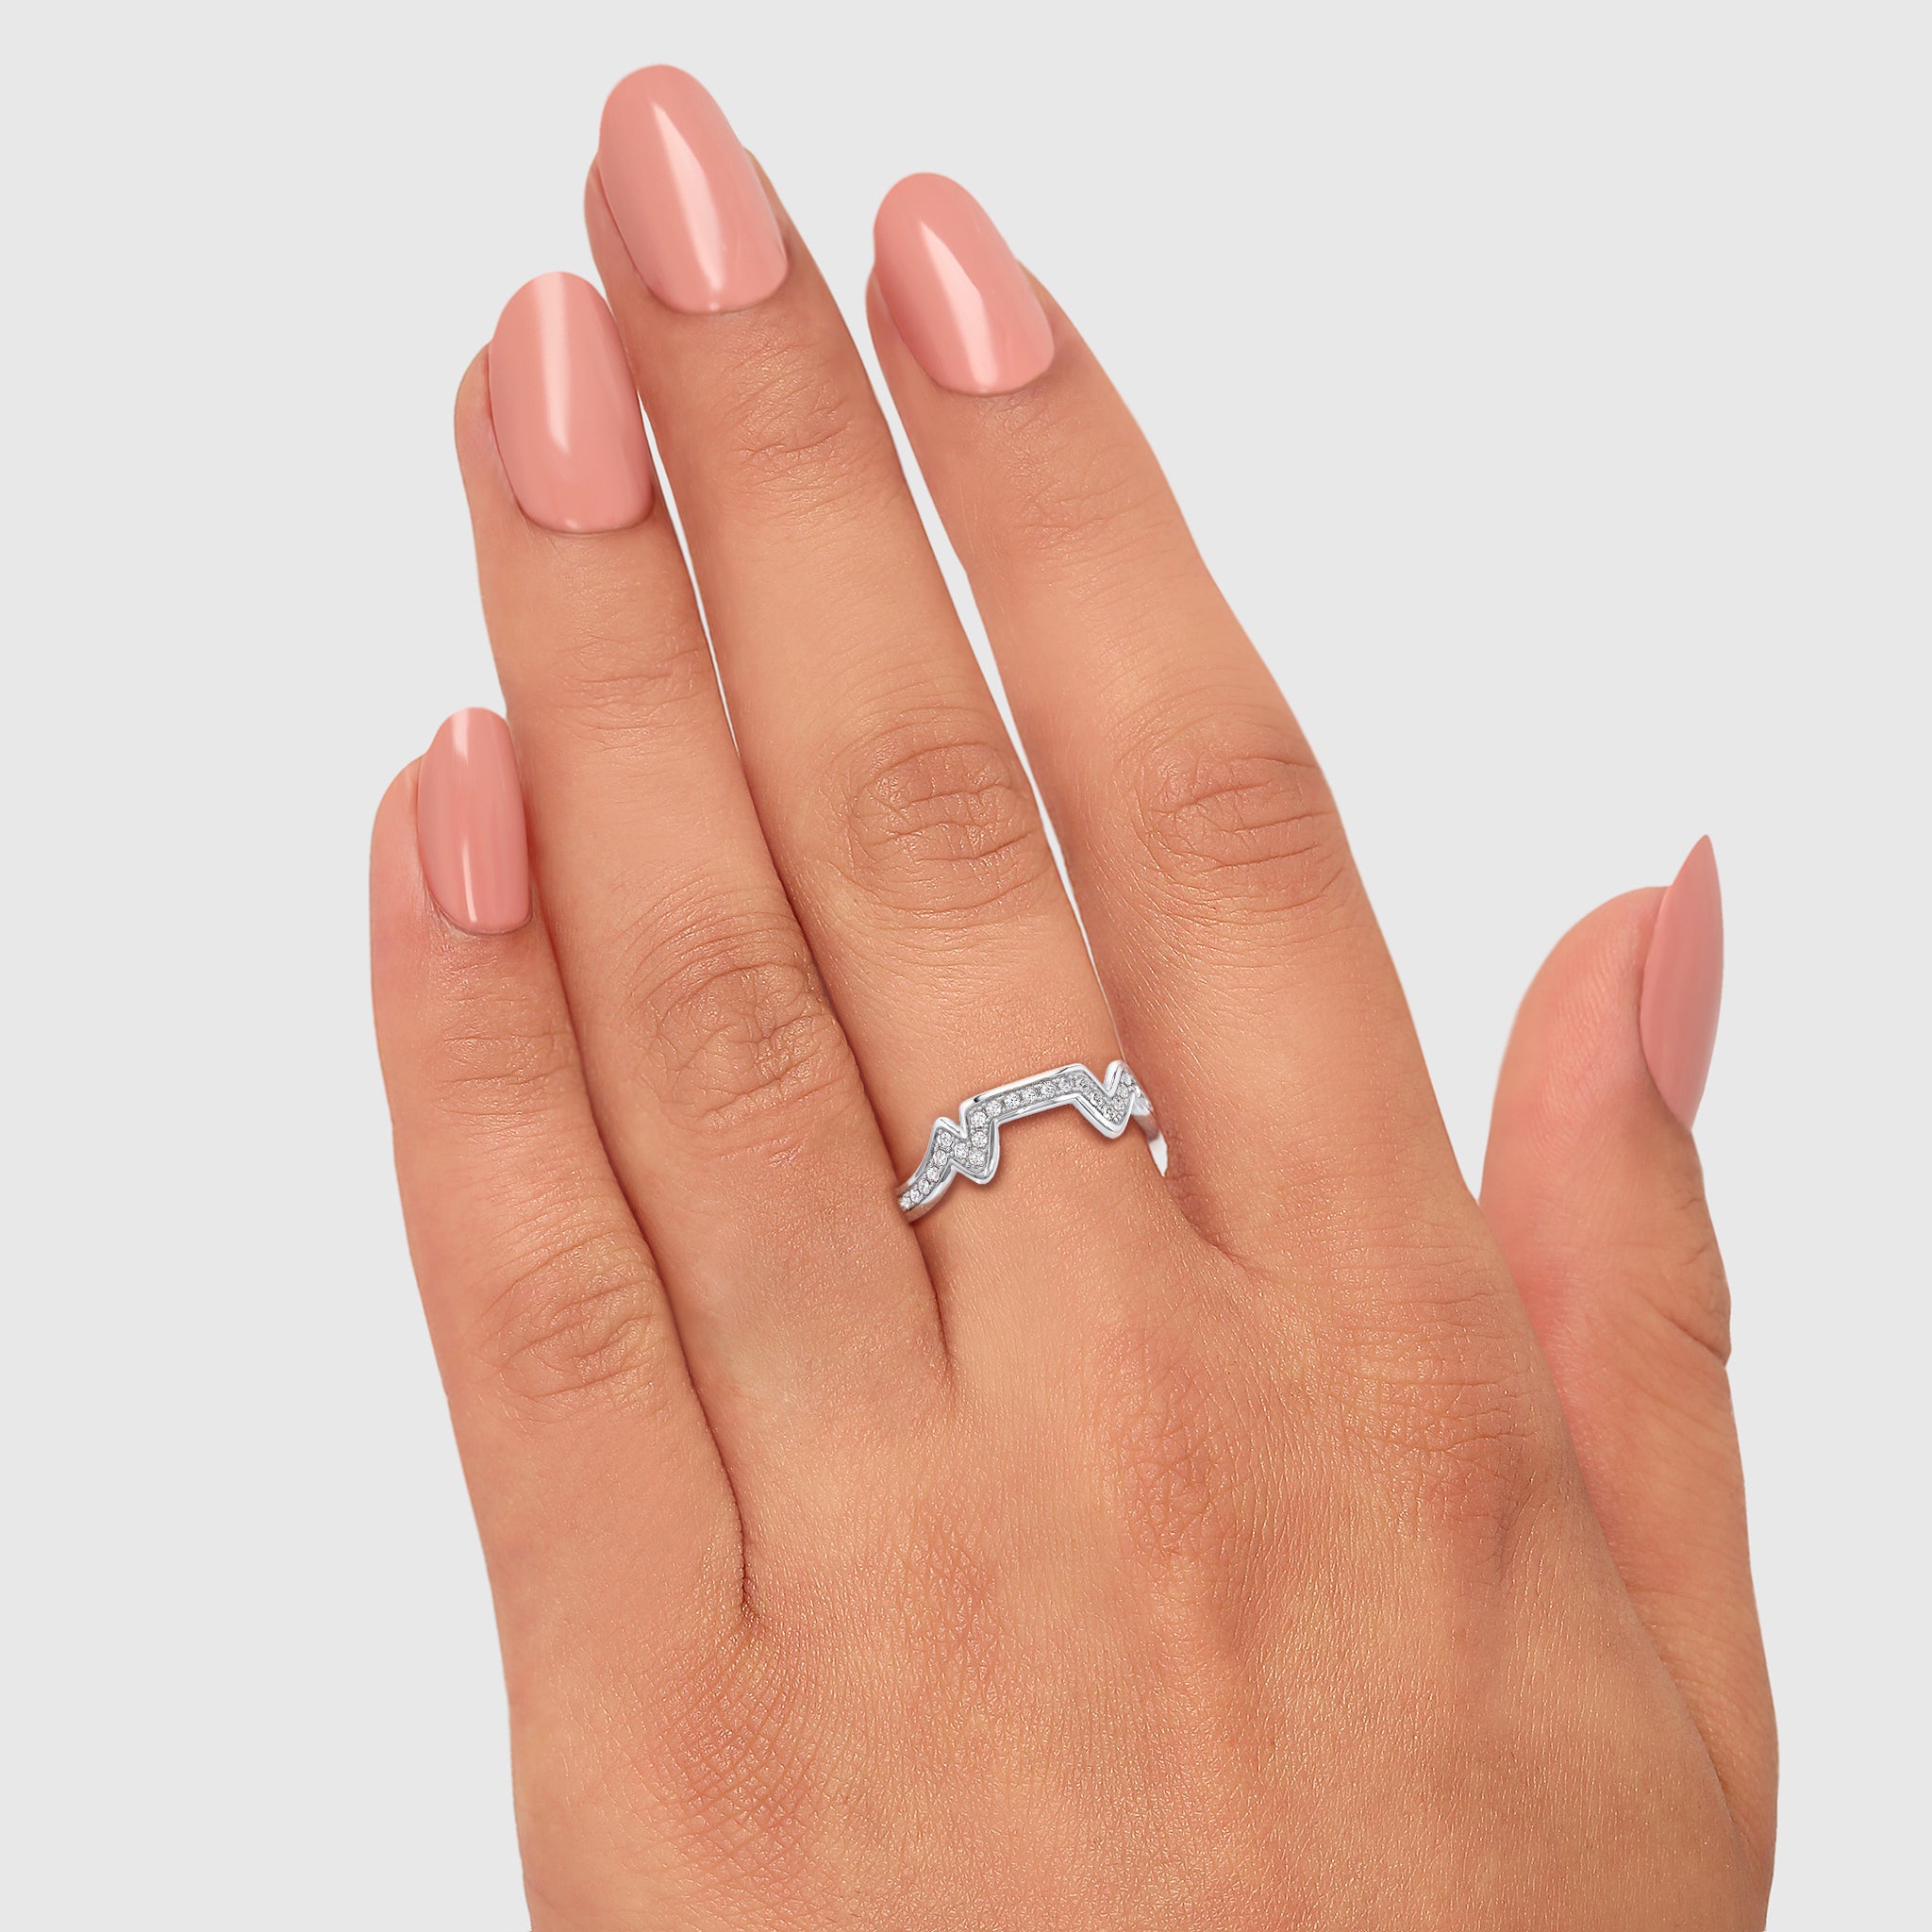 Shimansky - Women Wearing the Table Mountain Pave Diamond Ring Crafted in 14K White Gold